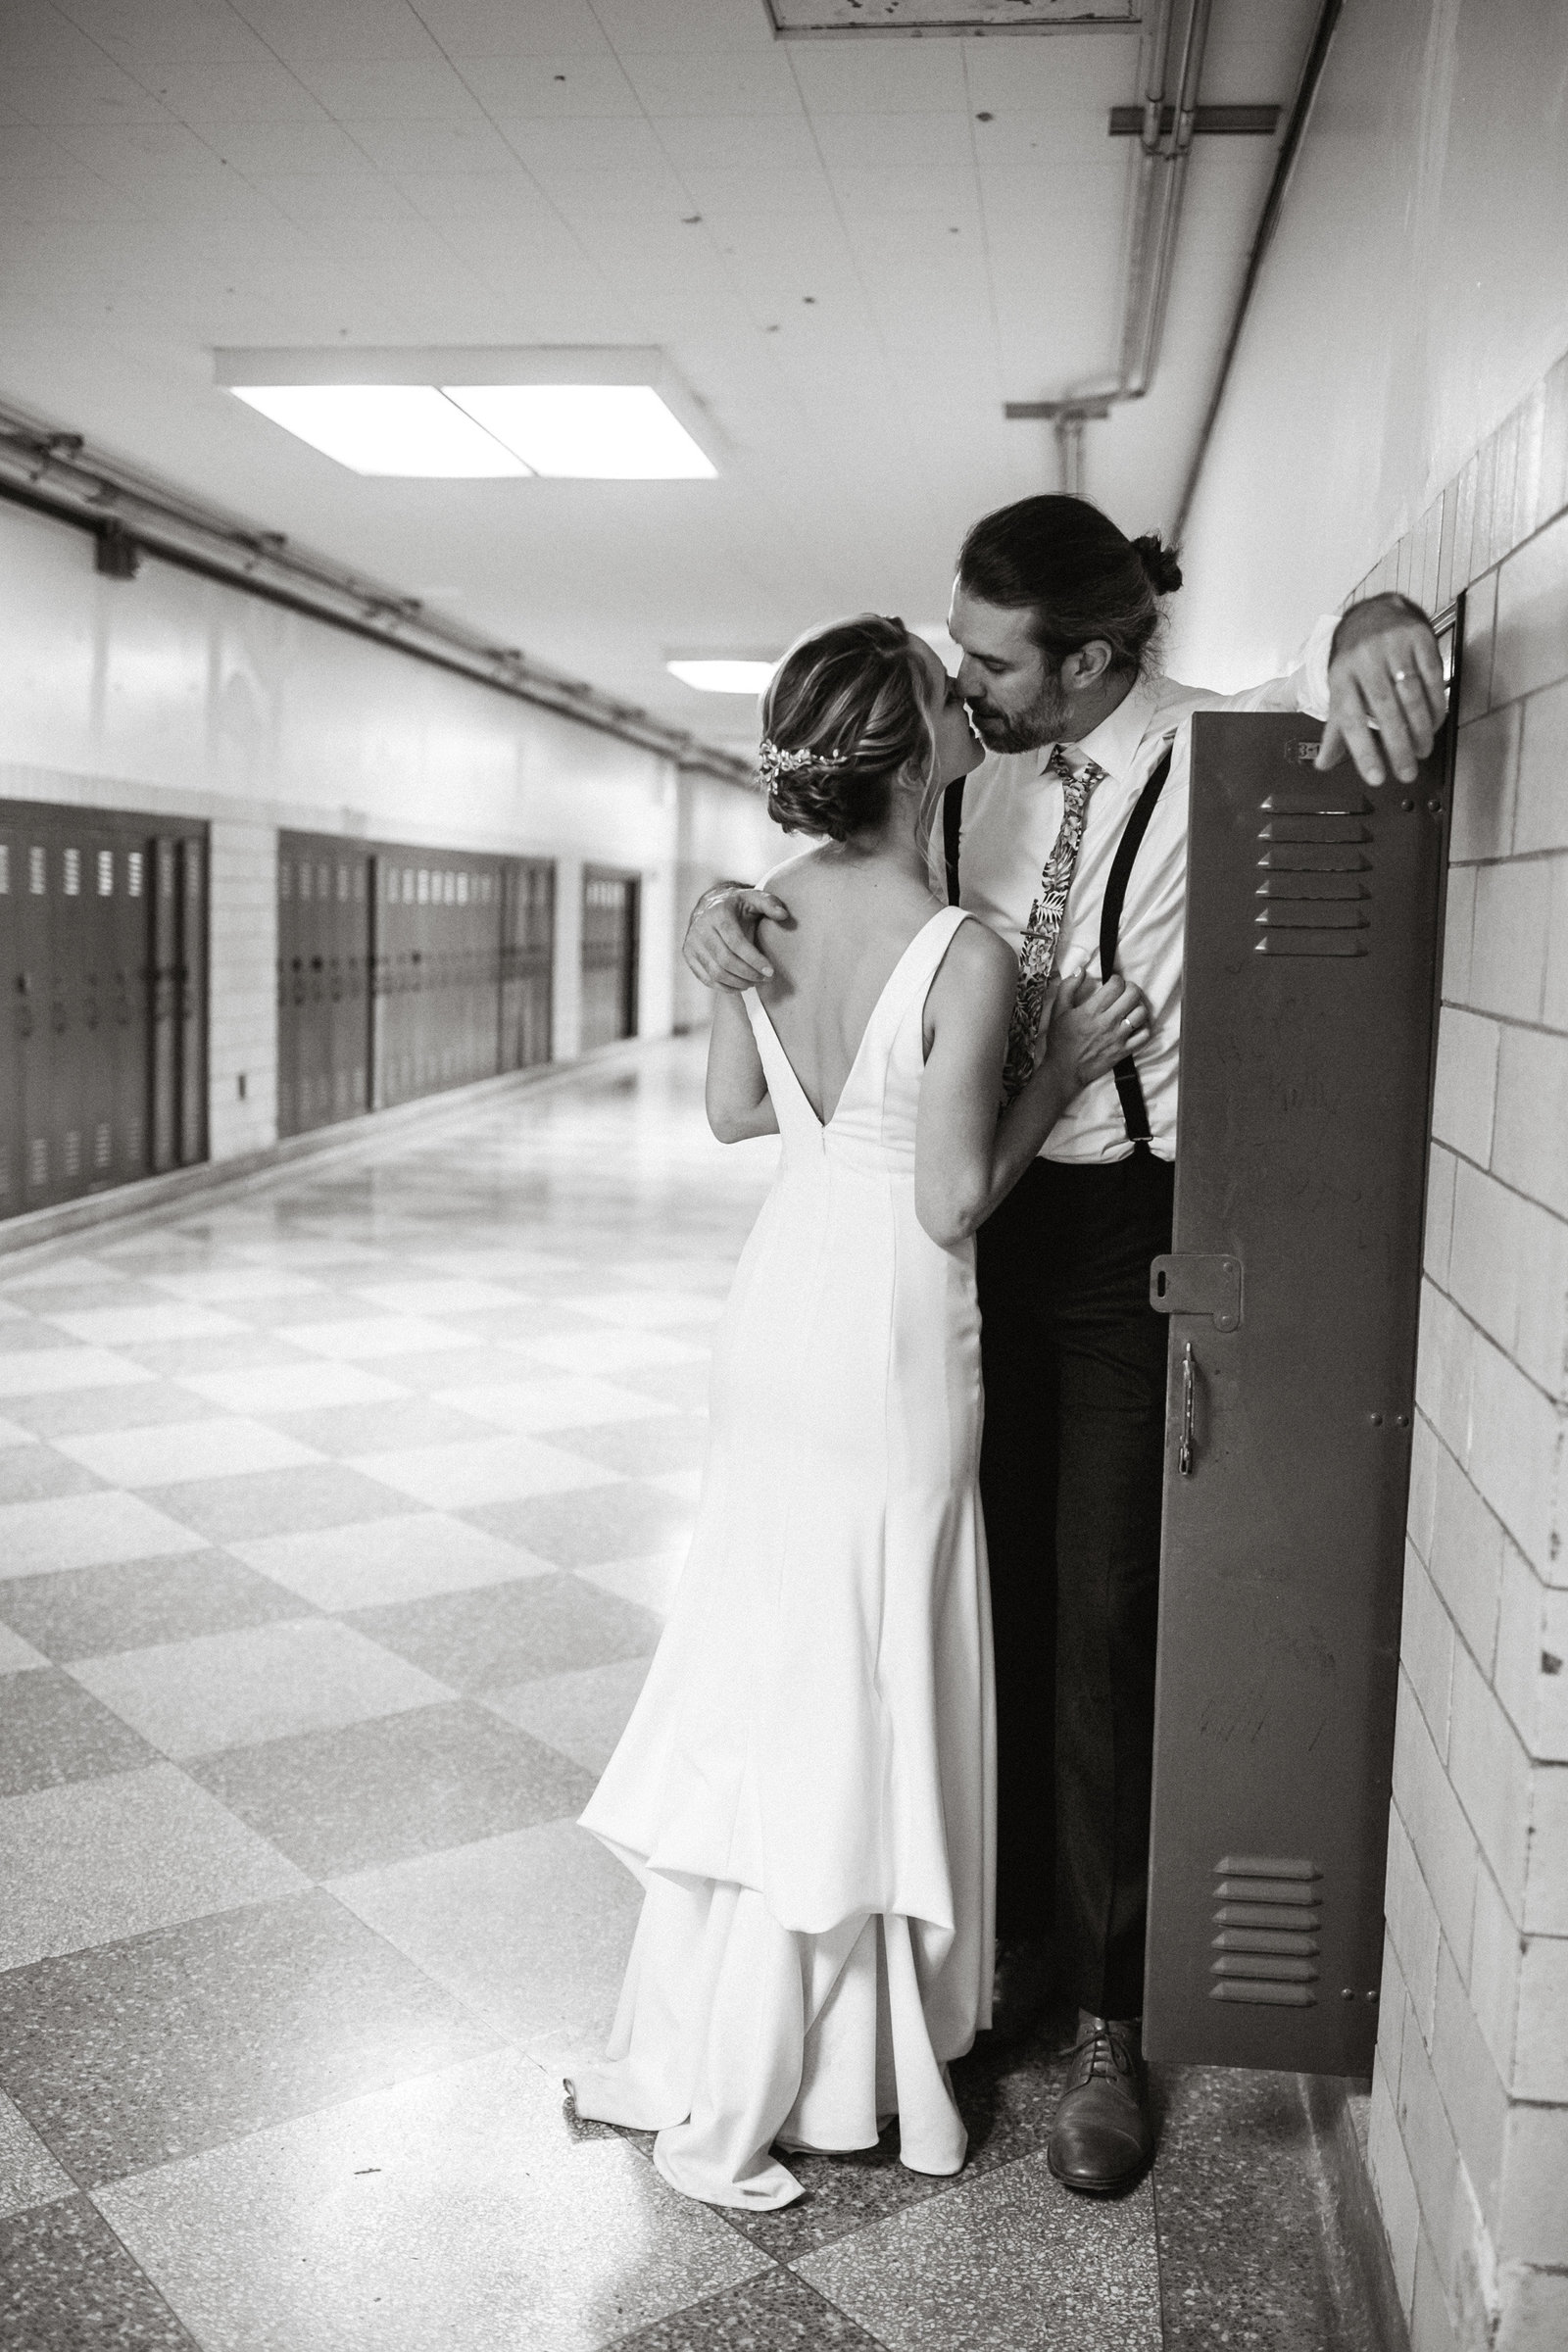 Bride and groom close the night with a kiss, alongside old school lockers at this unique wedding venue.